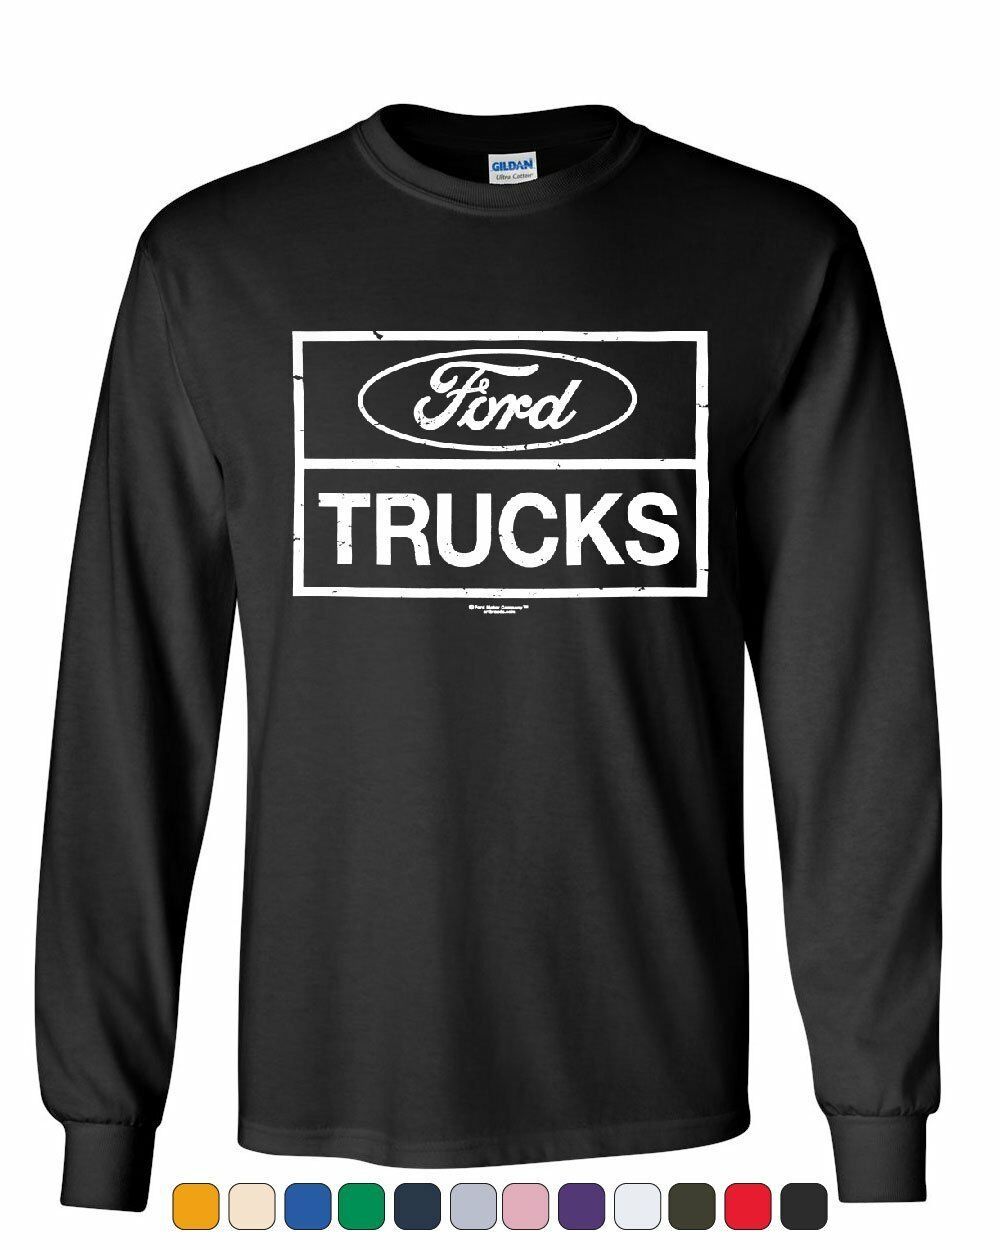 Distressed Ford Trucks Long Sleeve T-Shirt F150 American Pick Up Tee